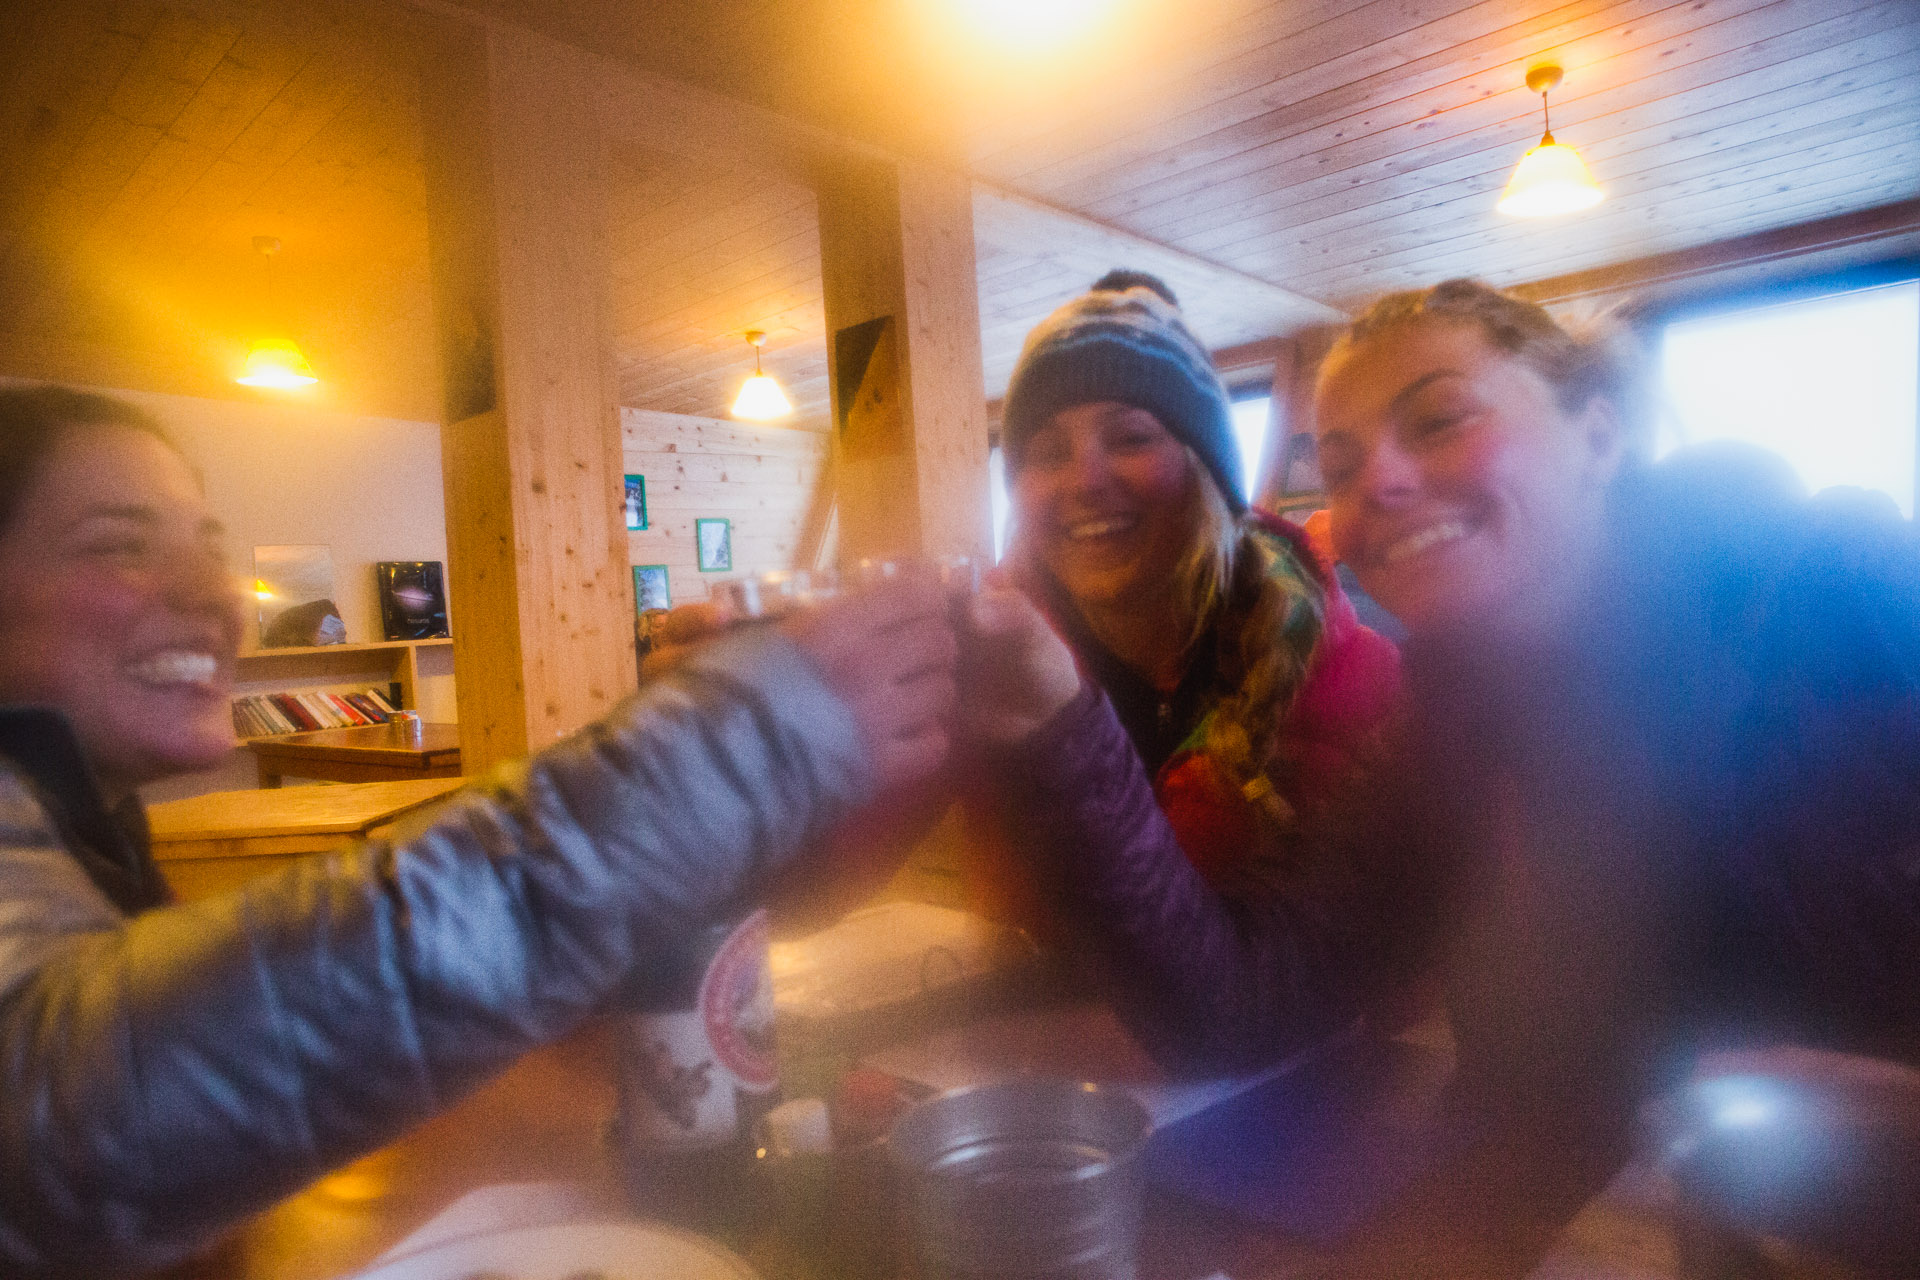 Maria DeBari, Liz Daley and Bibi Pekarek clink wine glasses at the Argentiere Refuge after a cold day of touring. My lens was frozen and fogged. Chamonix, France.